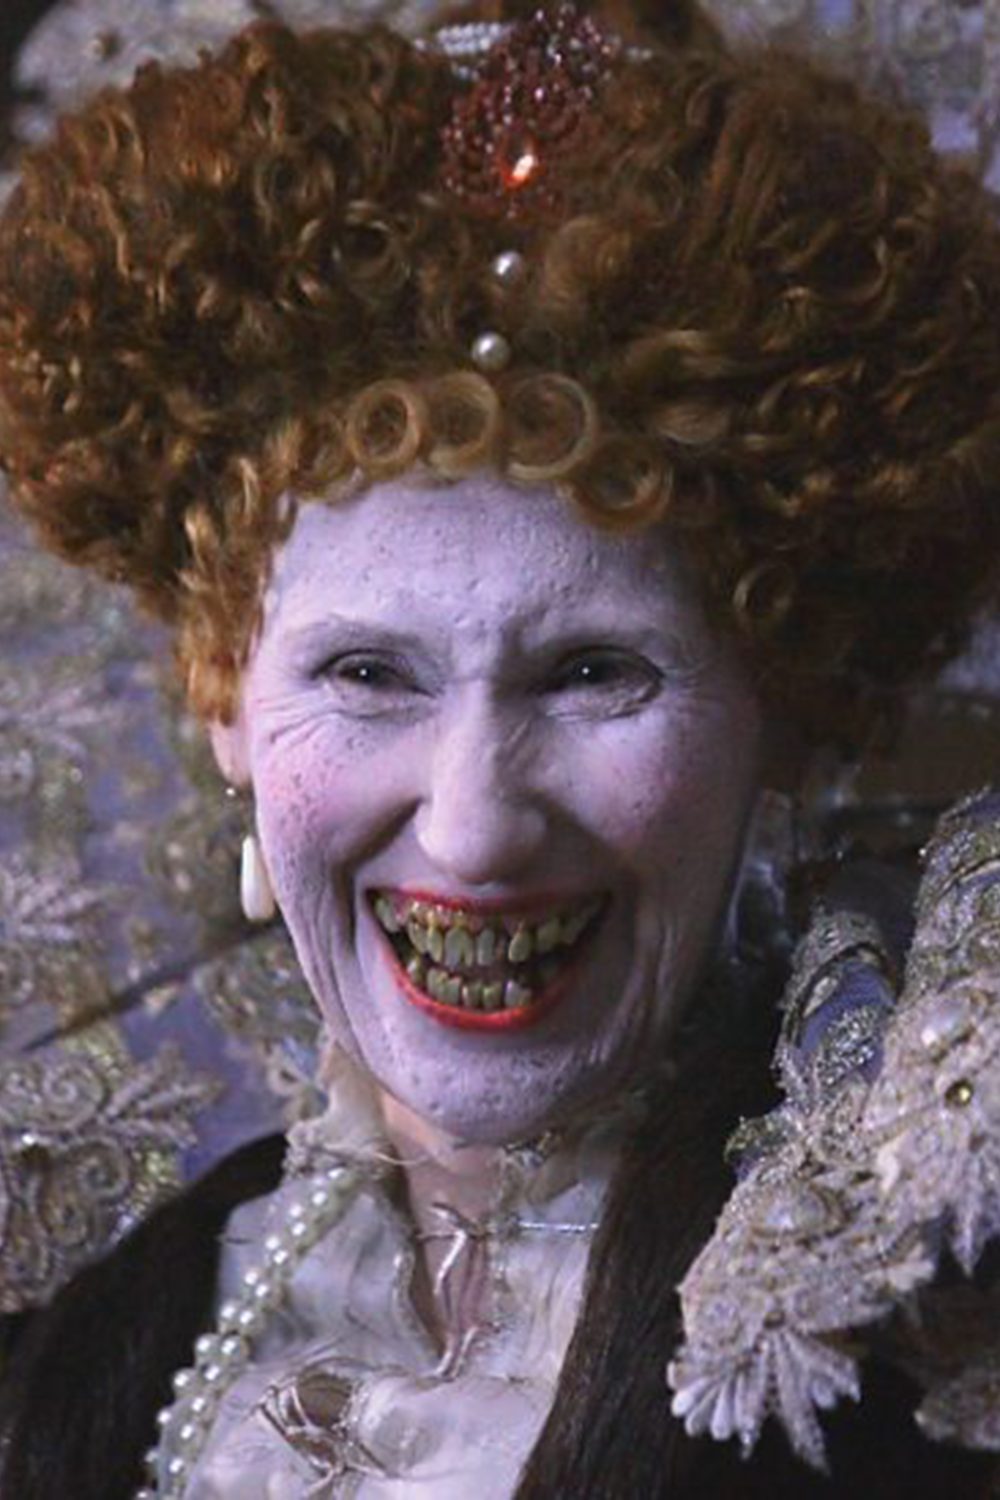 A still image from the film Armada: 12 Days to Save England featuring Queen Elizabeth I with white makeup, smallpox damaged skin and grotesquely rotten teeth.